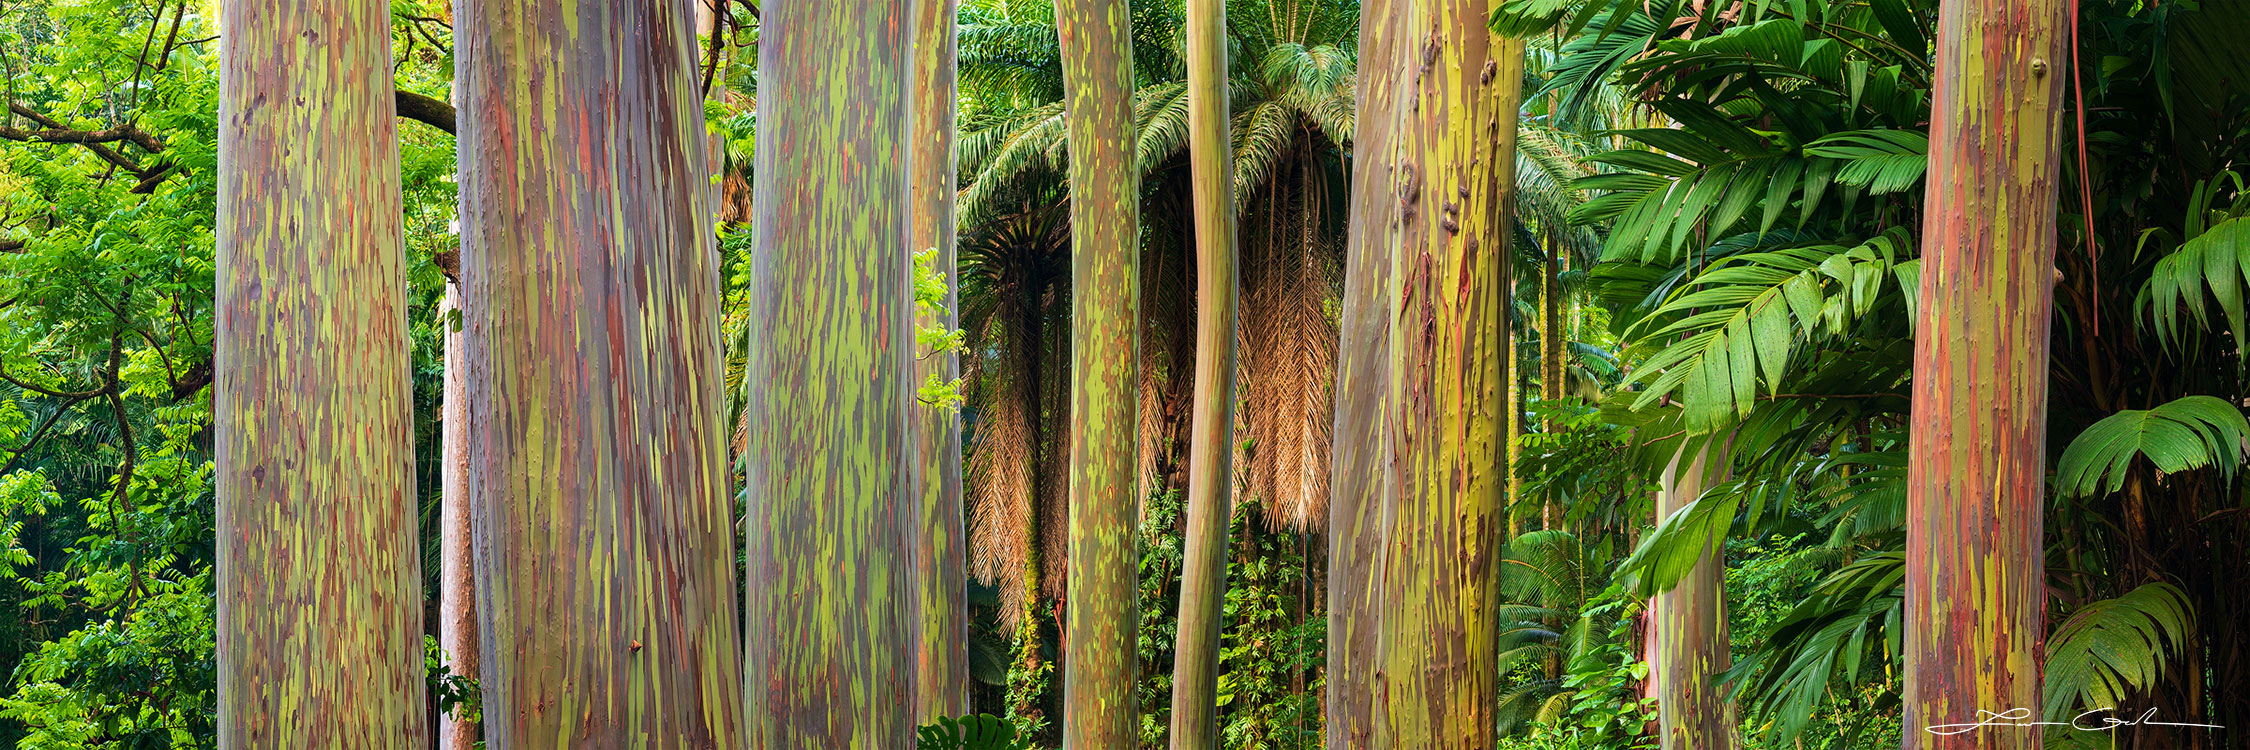 Close-up pano photo art print of colorful rainbow tree trunks surrounded by tropical vegetation in Maui - Gintchin Fine Art.